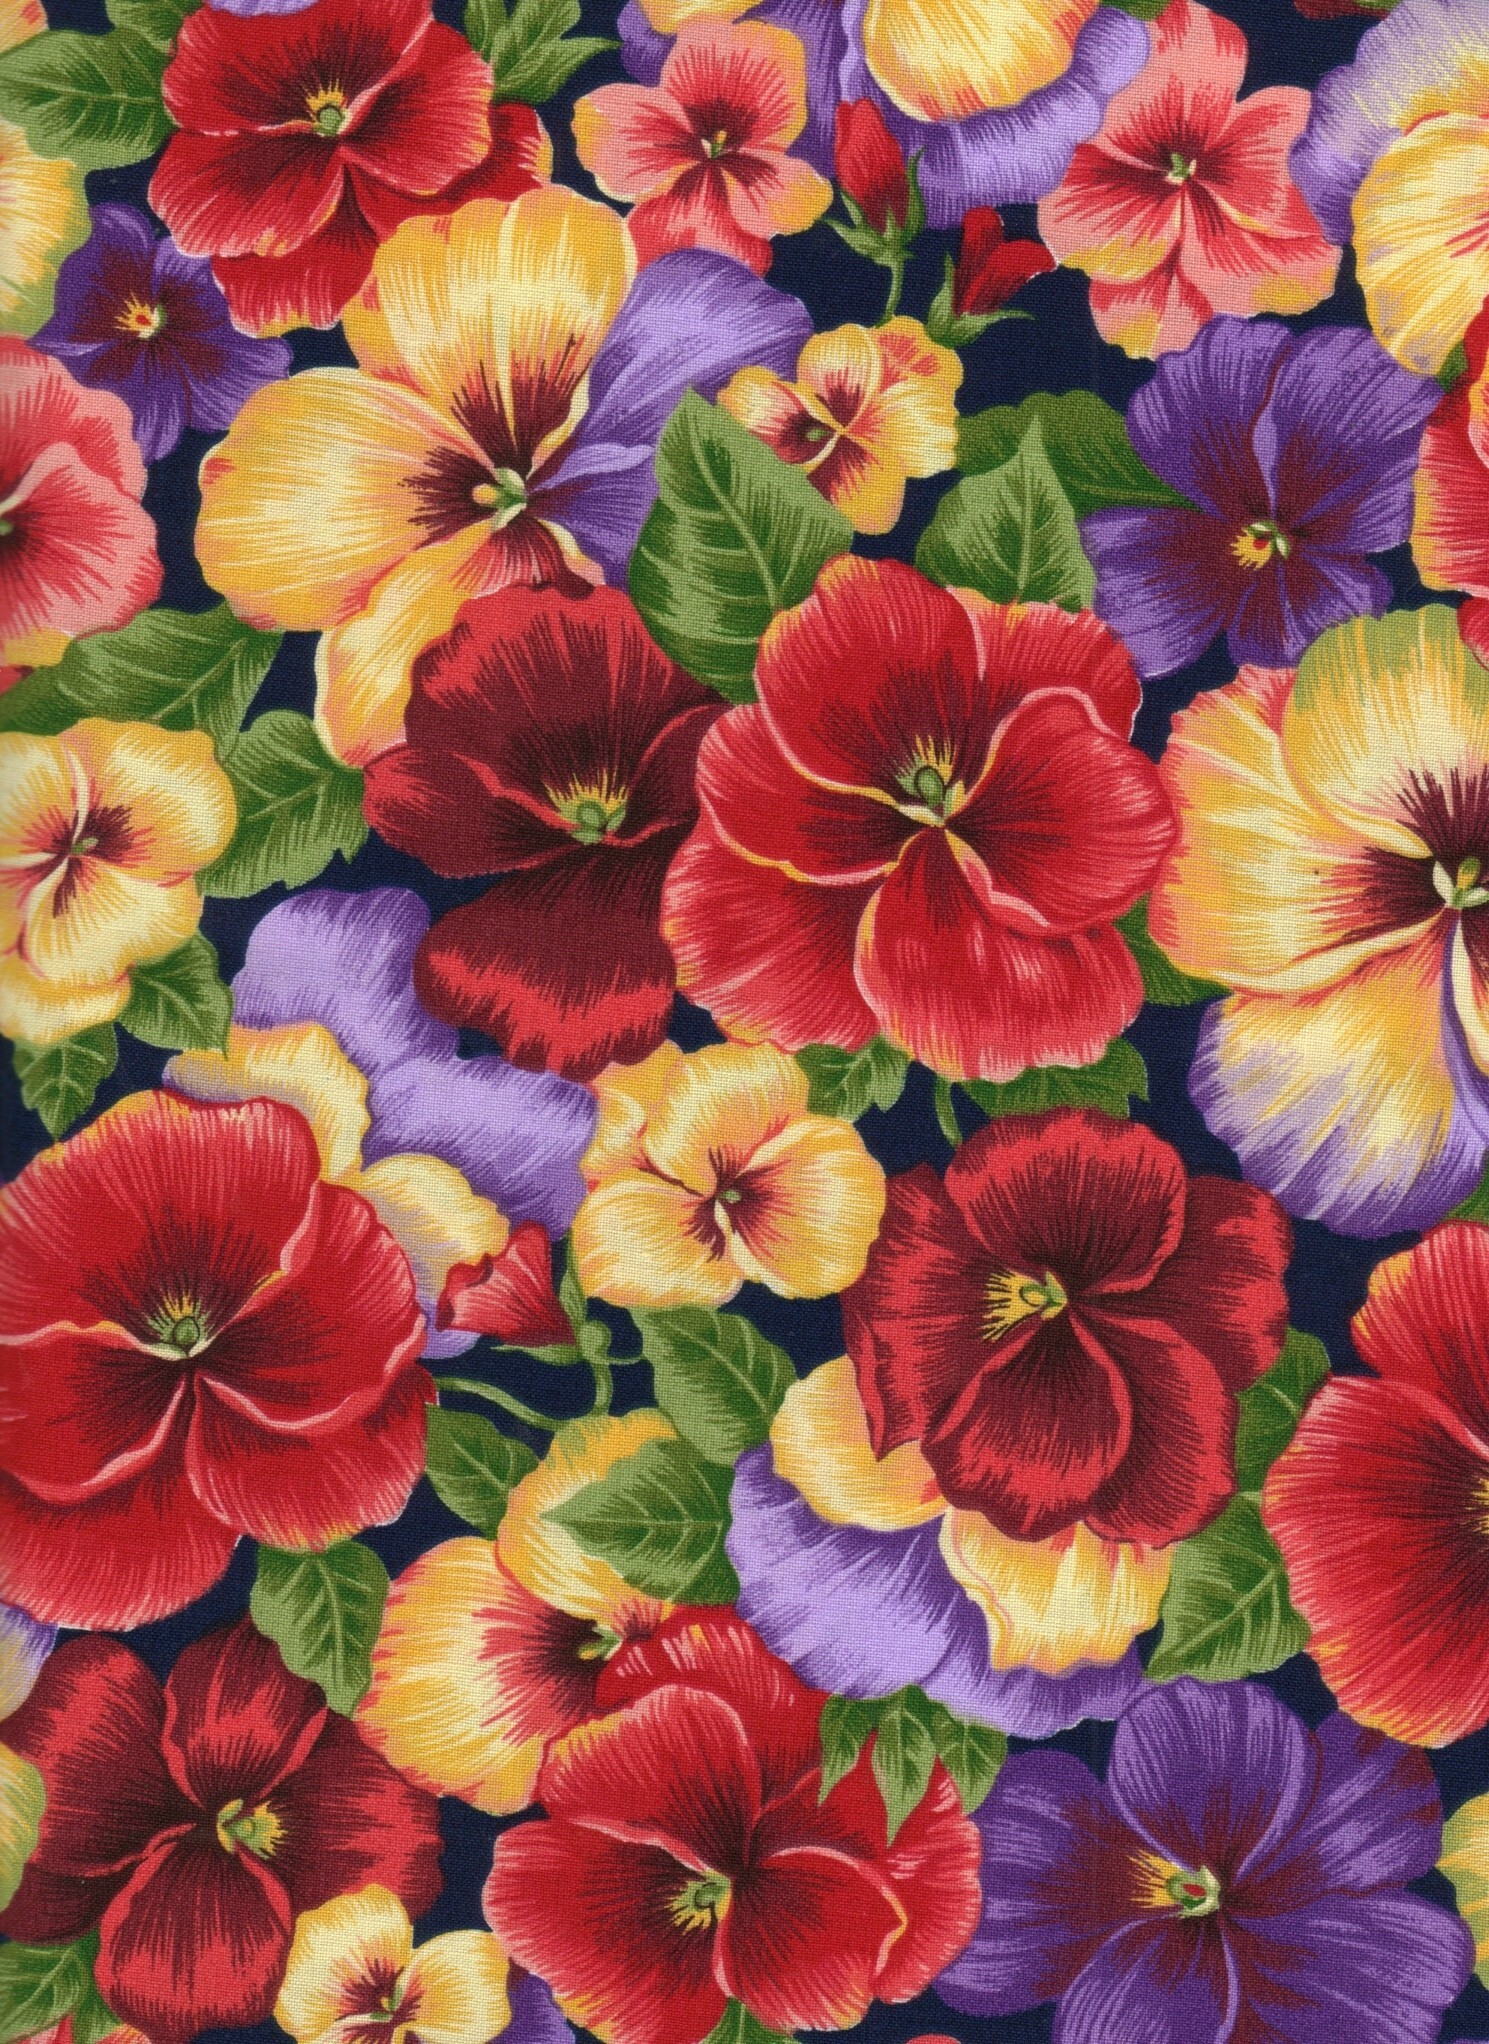 Pansies Stand For Good Thoughts - Red And Pink Pansy - HD Wallpaper 